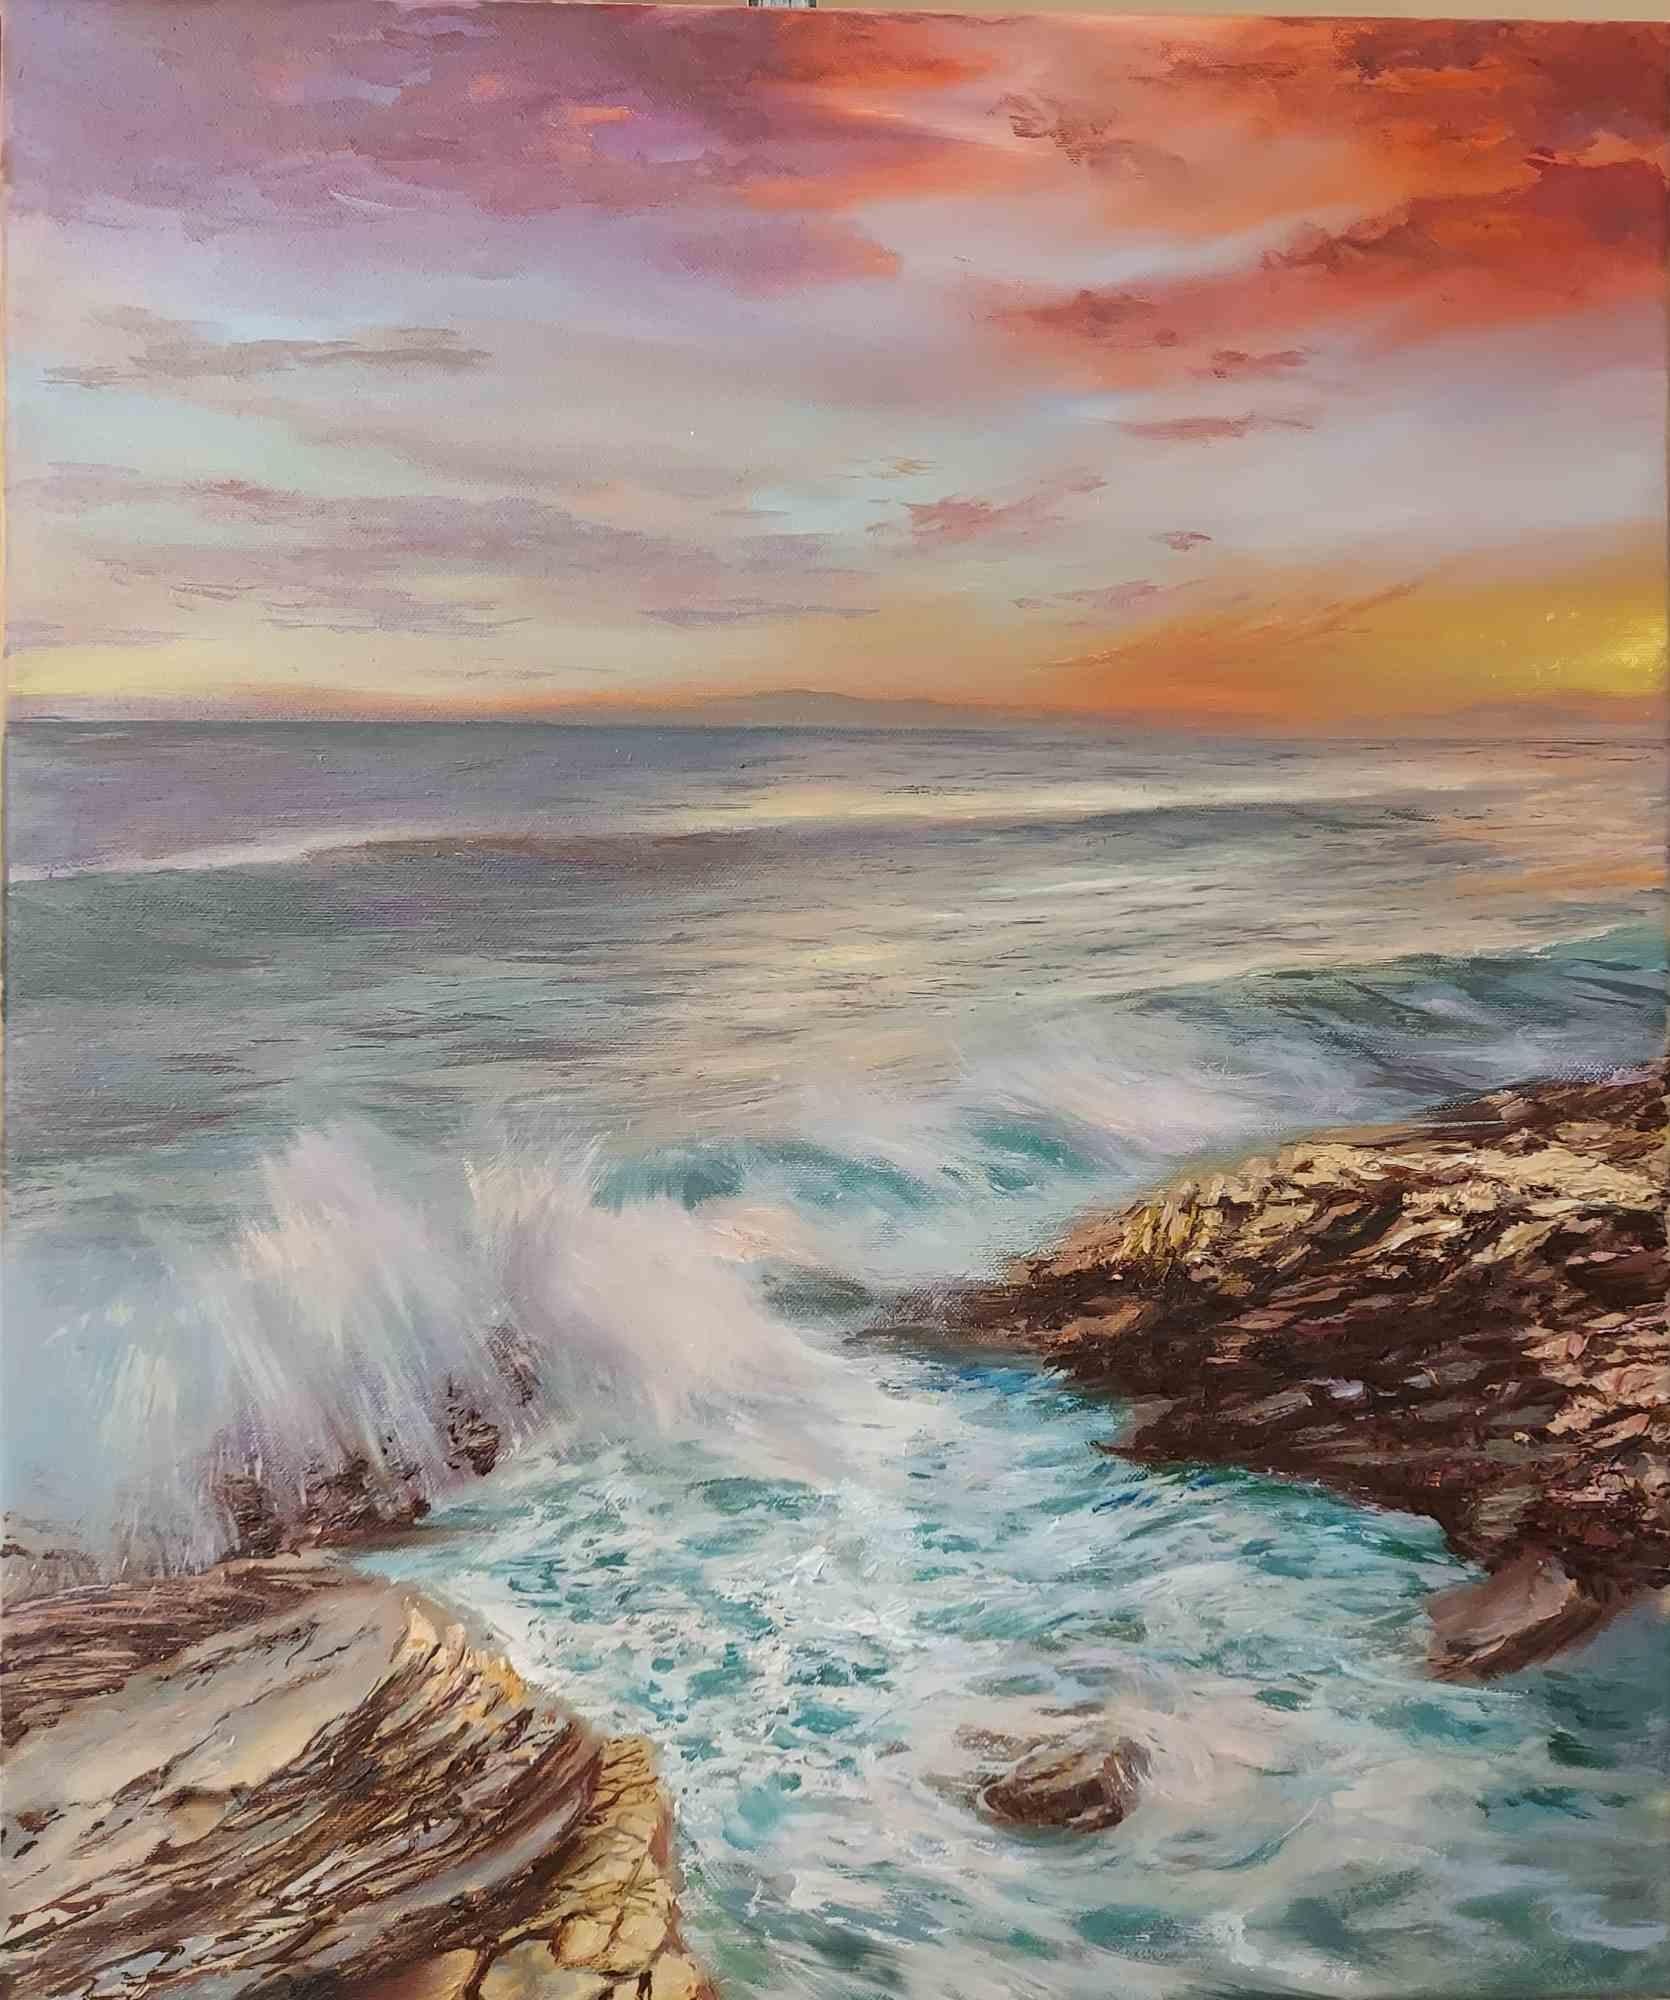 Oil painting on canvas 60 x 50 cm, called 'Magic evening',

is meant to create a magic feeling of the ocean under the special orange sunset light. 